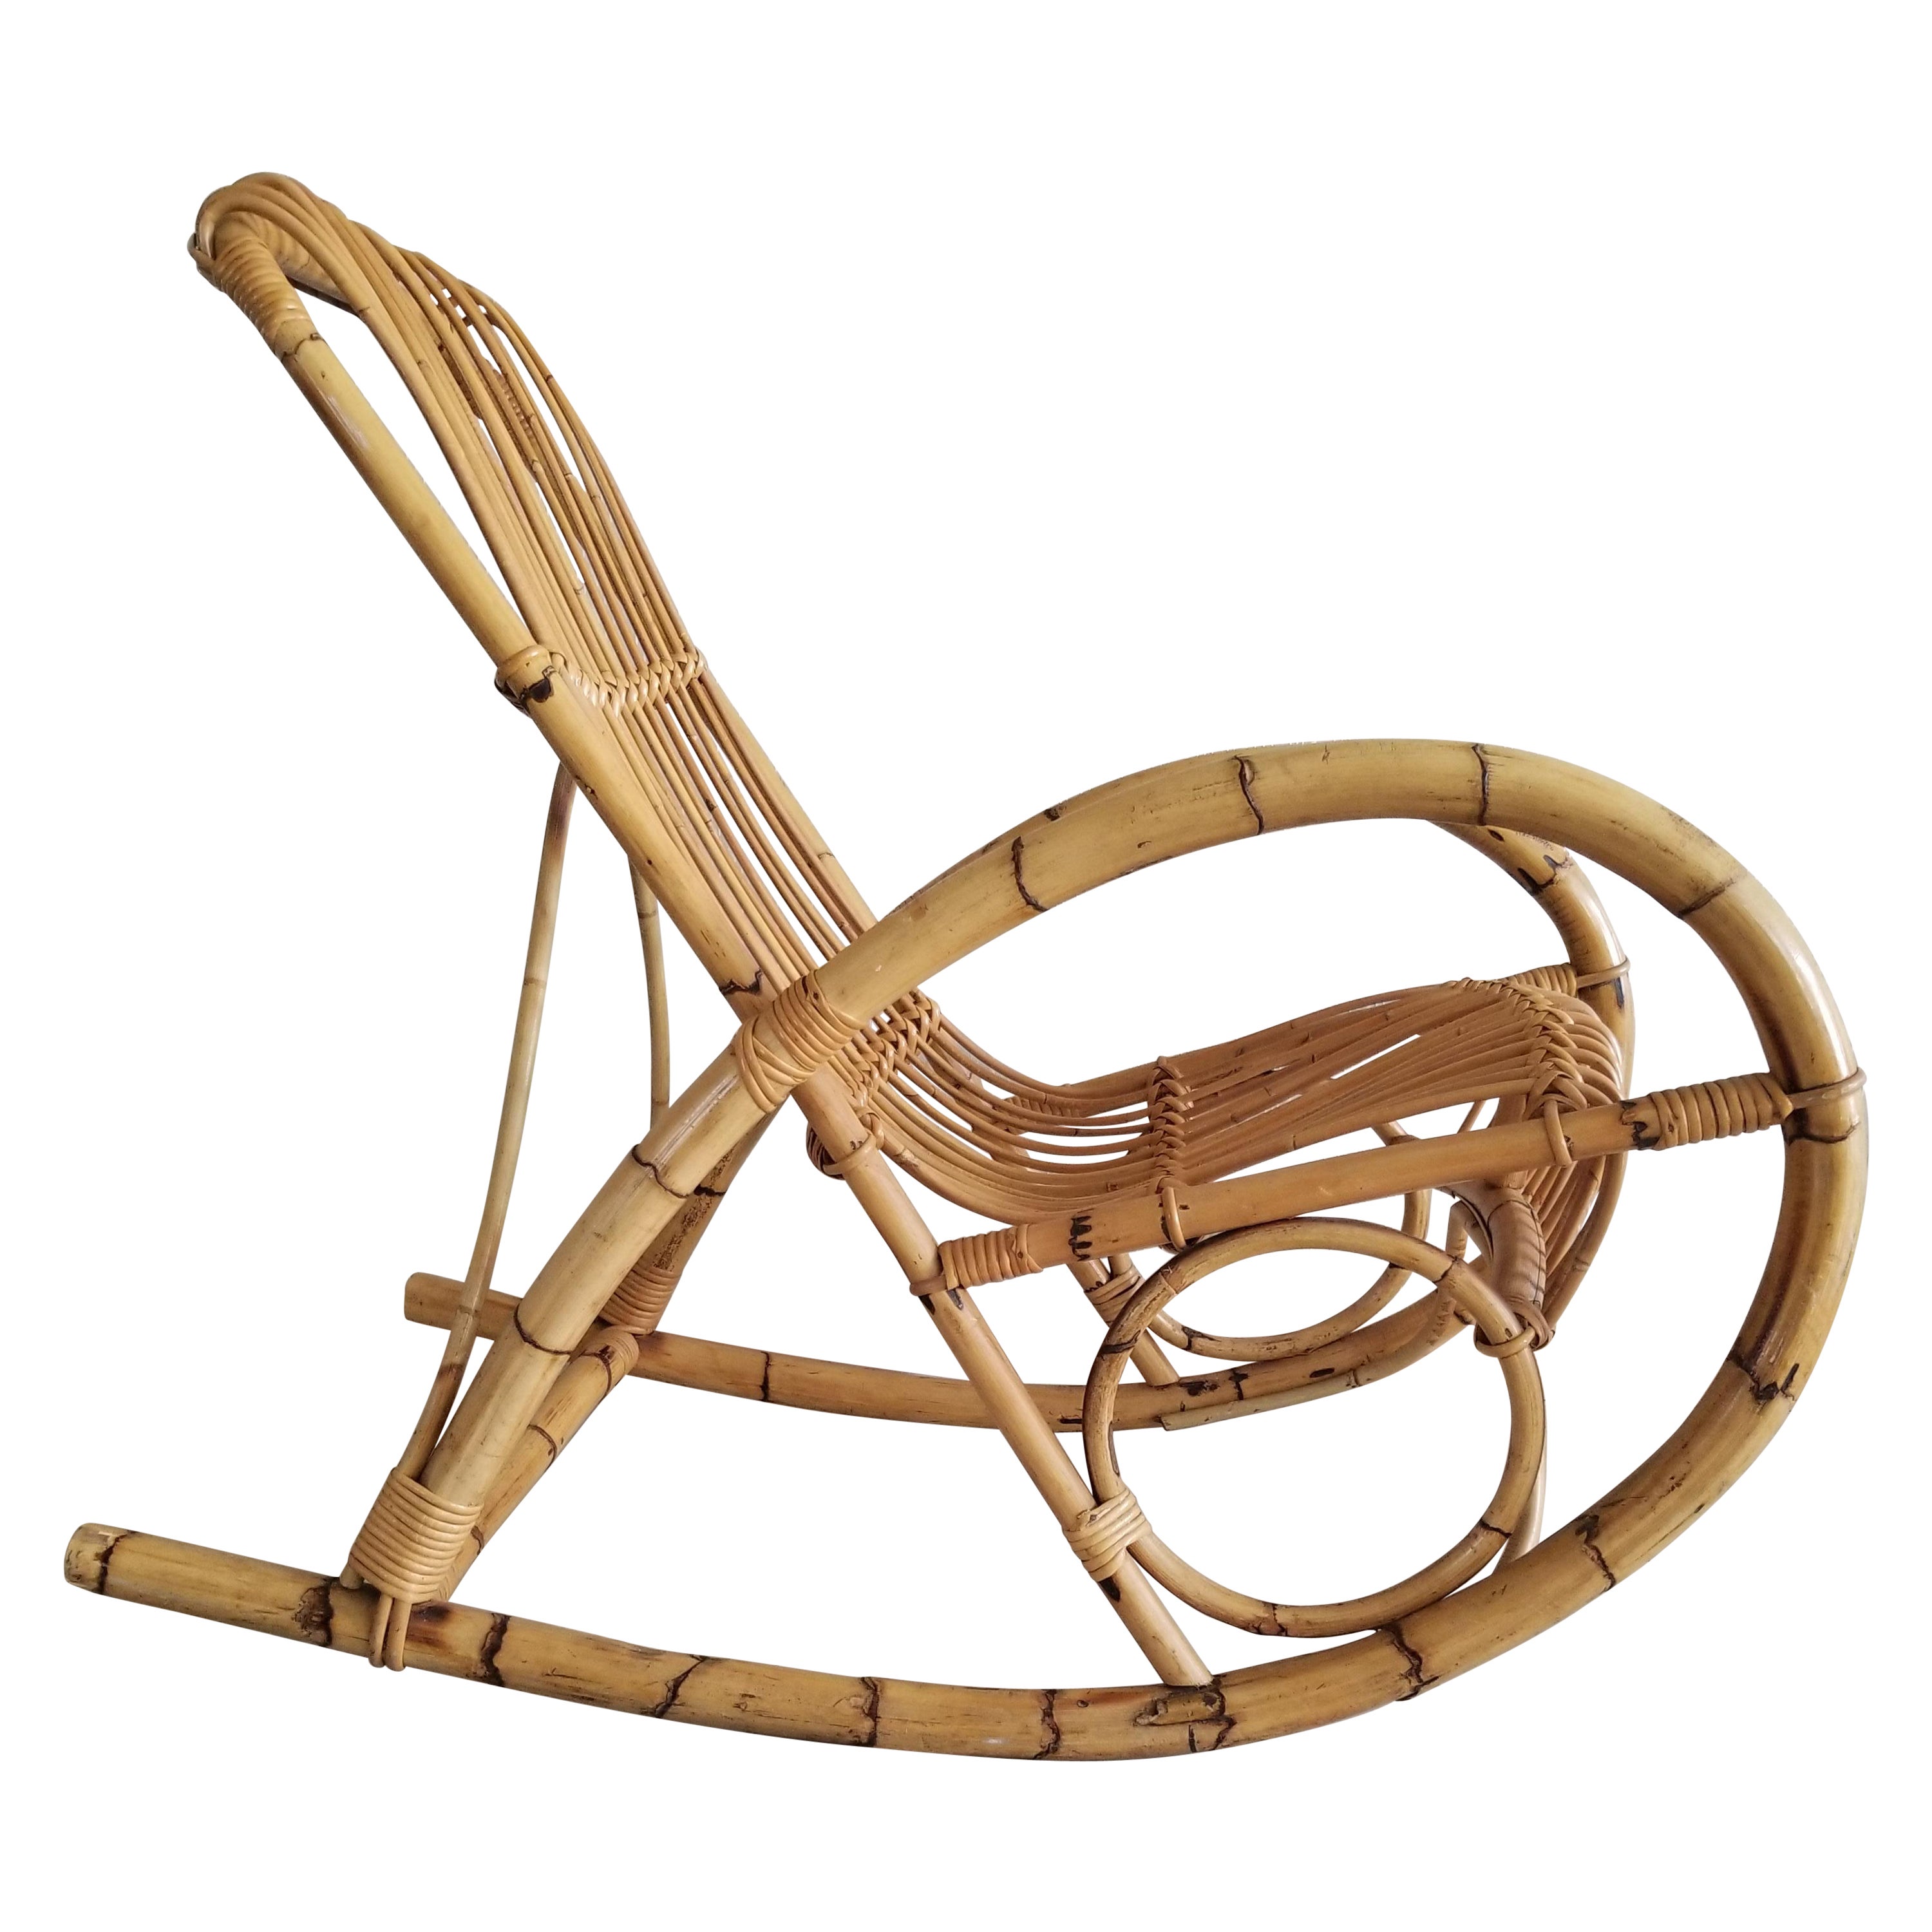 AMBIANIC presents
Italy 1960s relaxing Rocker 
Rocking Lounge Chair by Franco Albini designer architect.
Crafted in bentwood bamboo rattan.
Unmarked.
35 tall x 22 w x 41 d Seat h 17
Preowned original very good condition, unrestored unaltered.
Refer